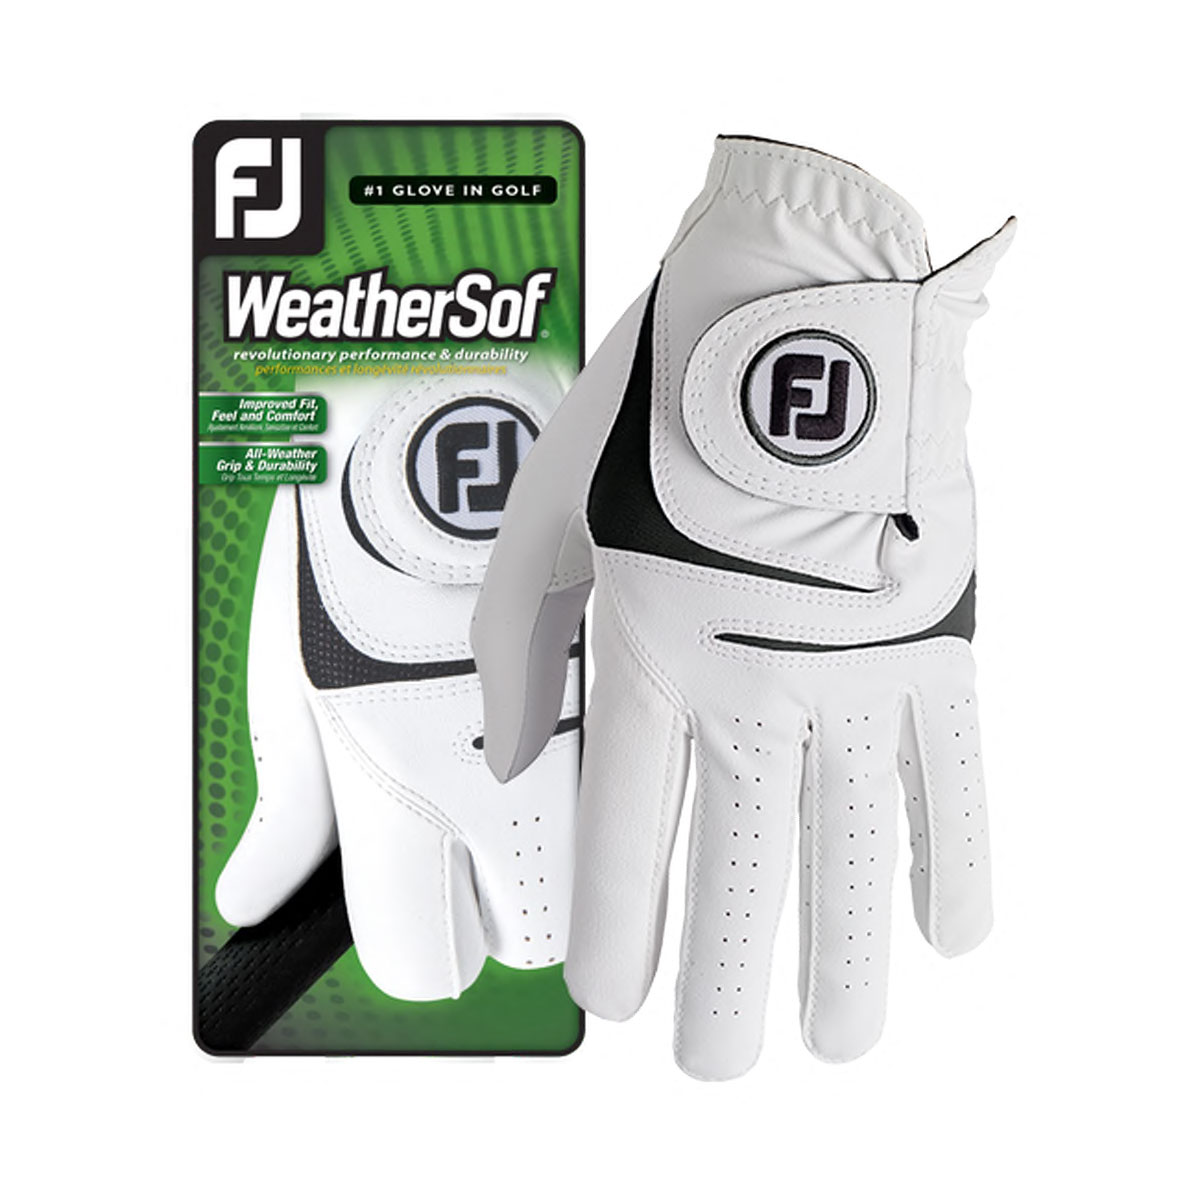 Footjoy Weathersof - Craig Donnelly Golf | Golf Tuition in Fife